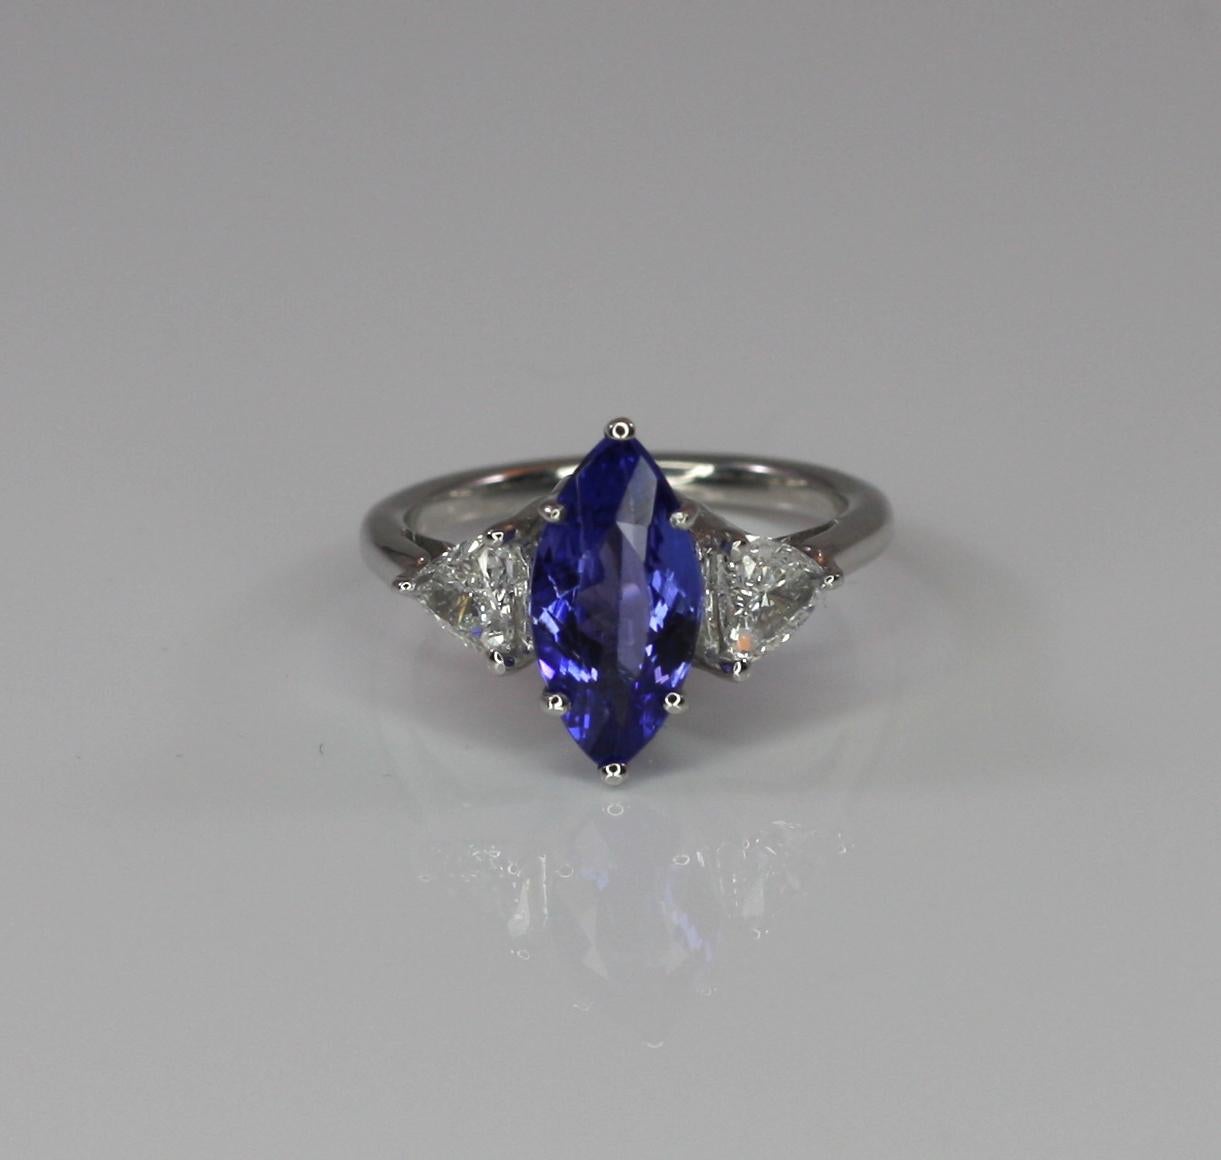 S. Georgios designer Ring in White Gold 18 Karat all hand made featuring a solitaire Marquise cut Tanzanite the weight 2.14 Carat and two (2) natural white diamonds trilliant cut total weight of 0.66 Carat. This is a gorgeous and classic ring for